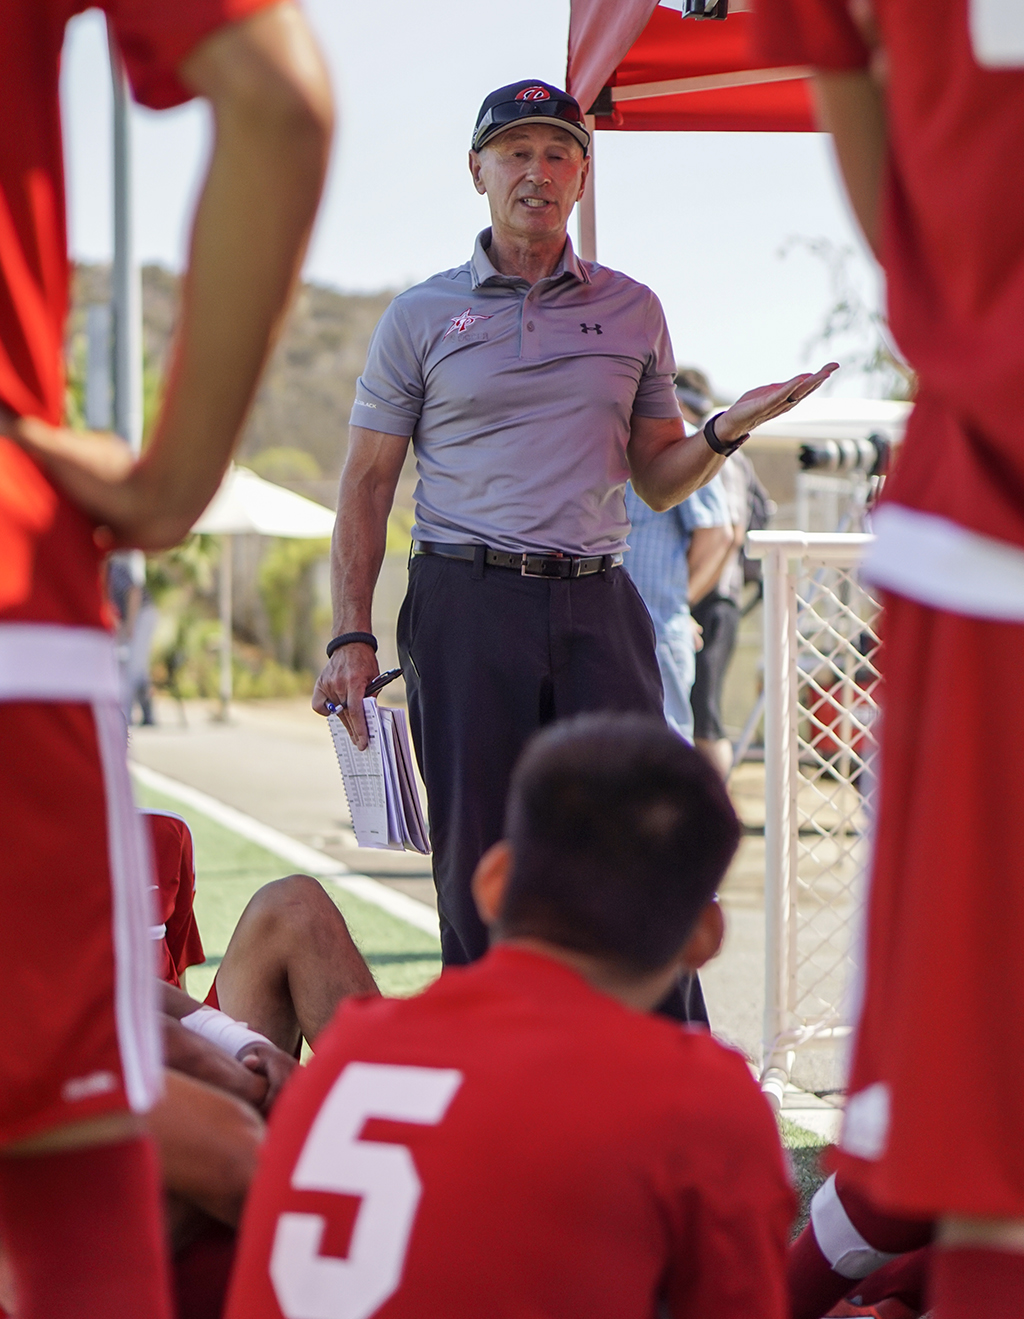 Palomar Head Coach David Whiddon talks to the team prior to the start of the game against Cypress College. The Comets hosted the Chargers at Minkoff Field Sept. 6 and lost 2-1. The Comets record now stands at (0-2-2 Overall, 0-0-0 PCAC). Philip Farry / The Telescope